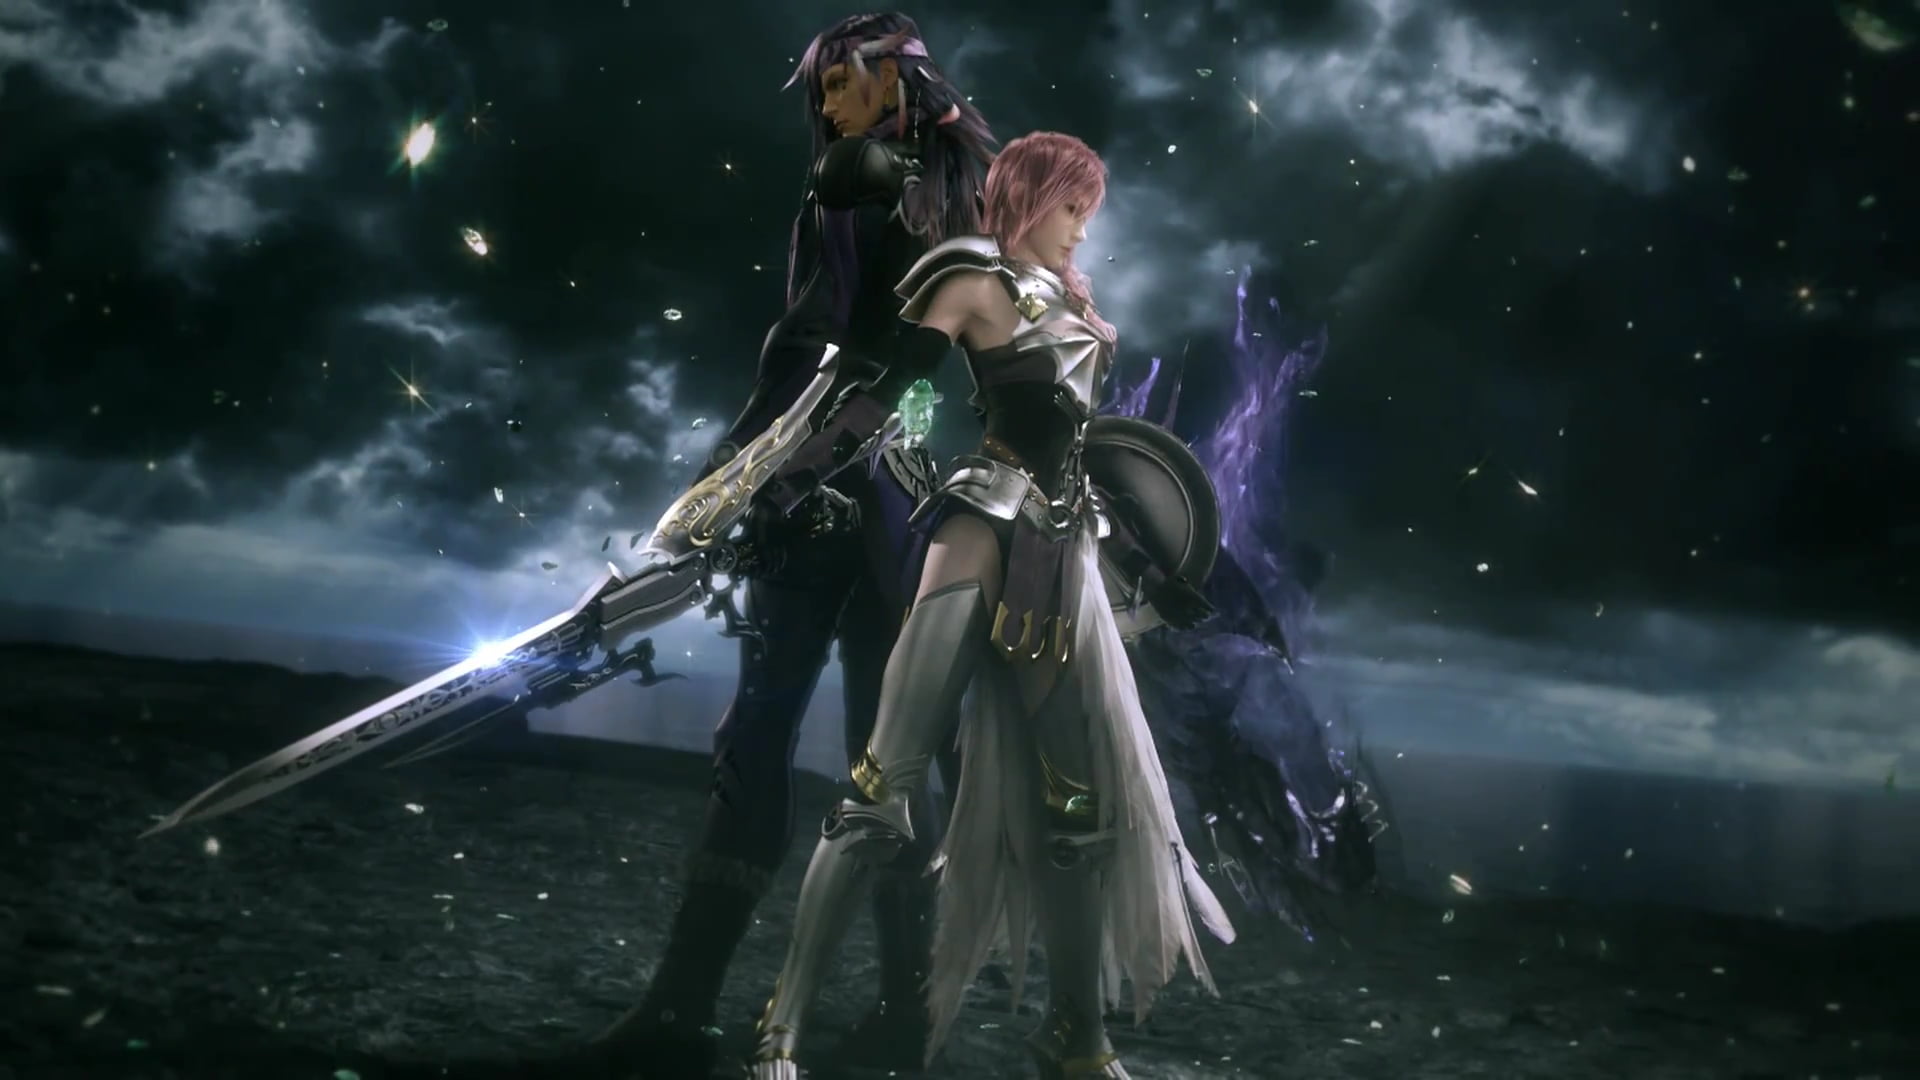 Final Fantasy XIII, Claire Farron, video games, two people